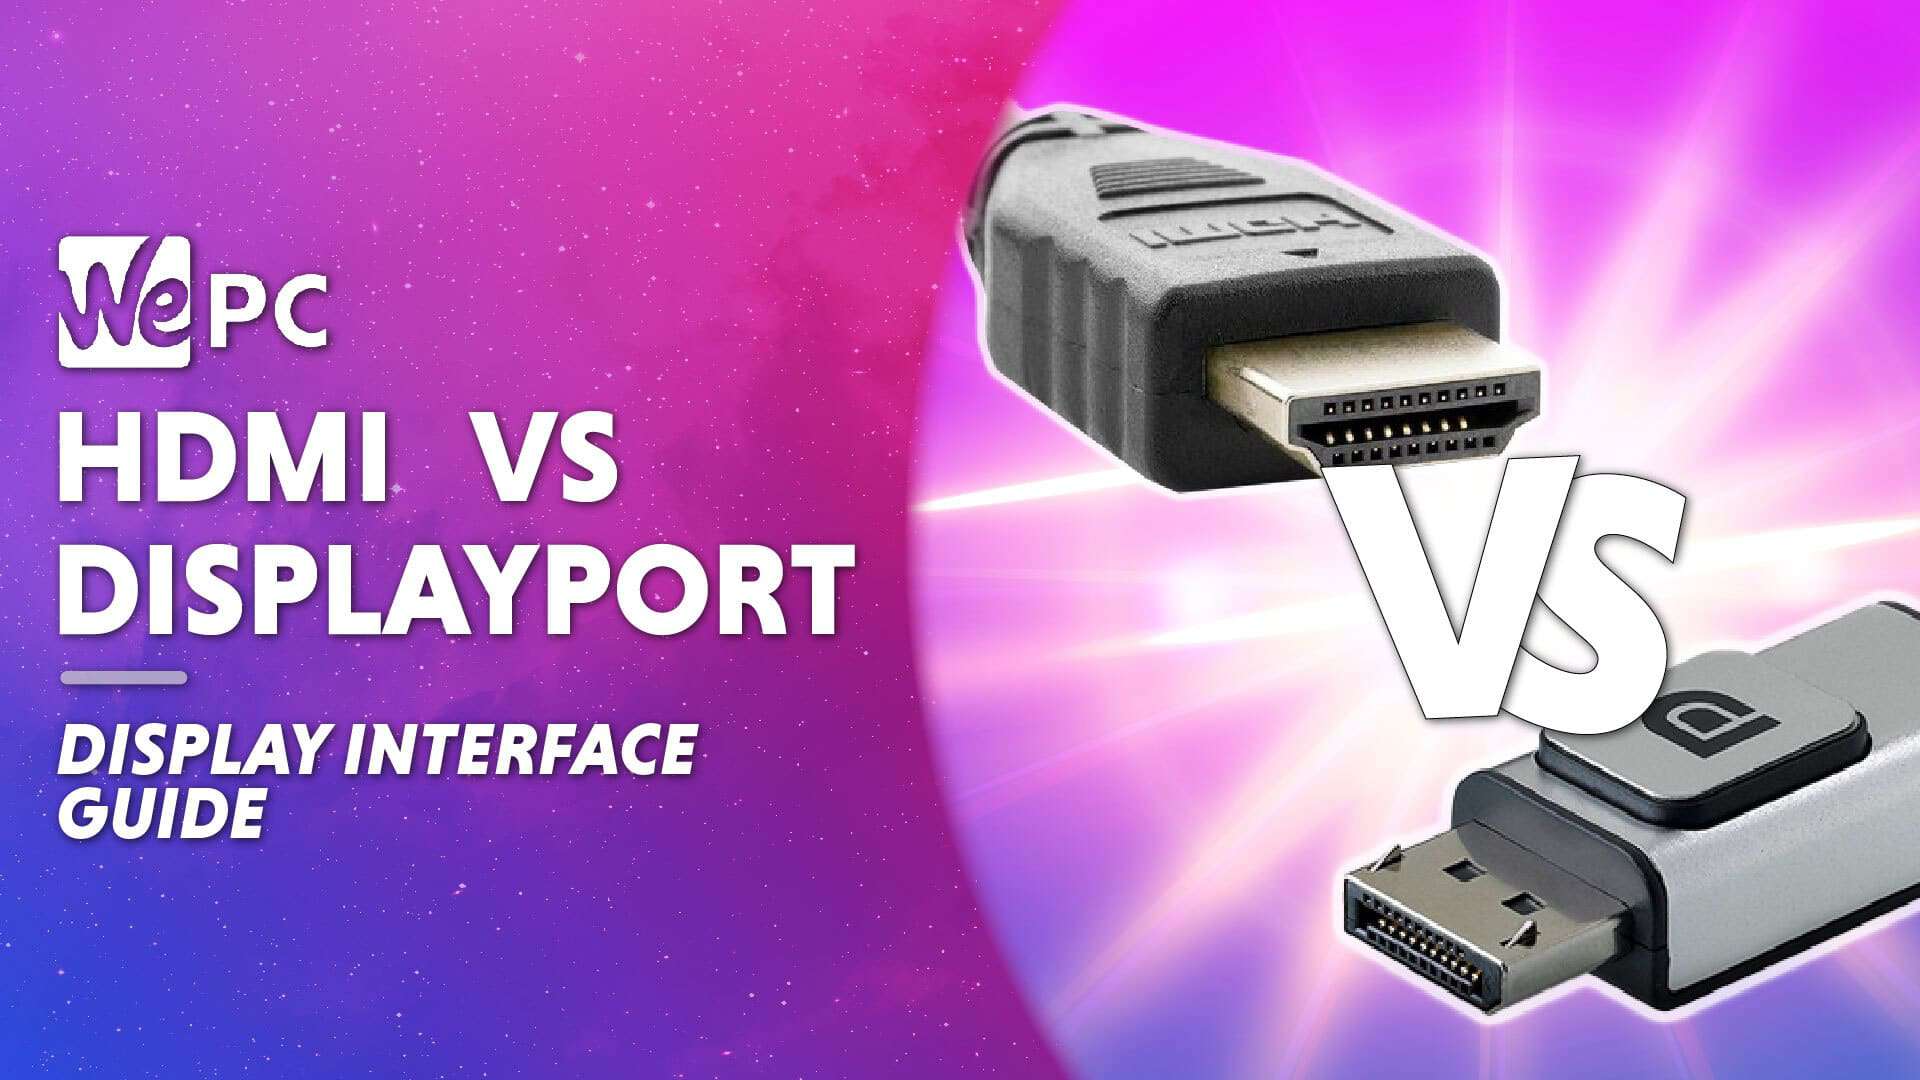 DisplayPort Vs HDMI Which Display Interface Is The Best? WePC